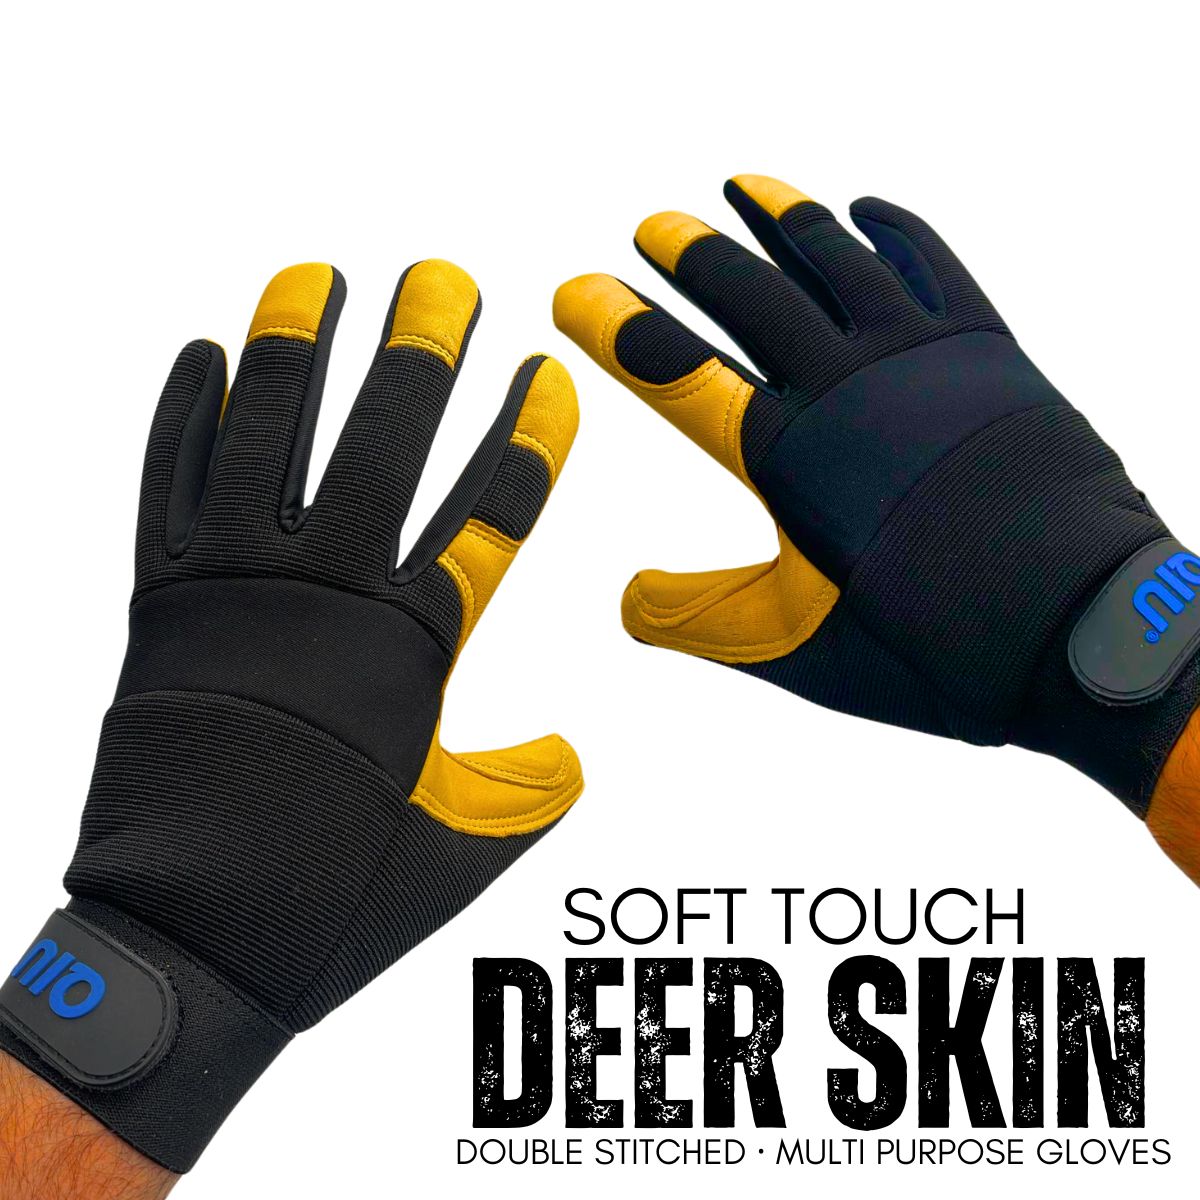 Handy Works Multi Purpose Flexible Gloves made from Deer Skin - South East Clearance Centre